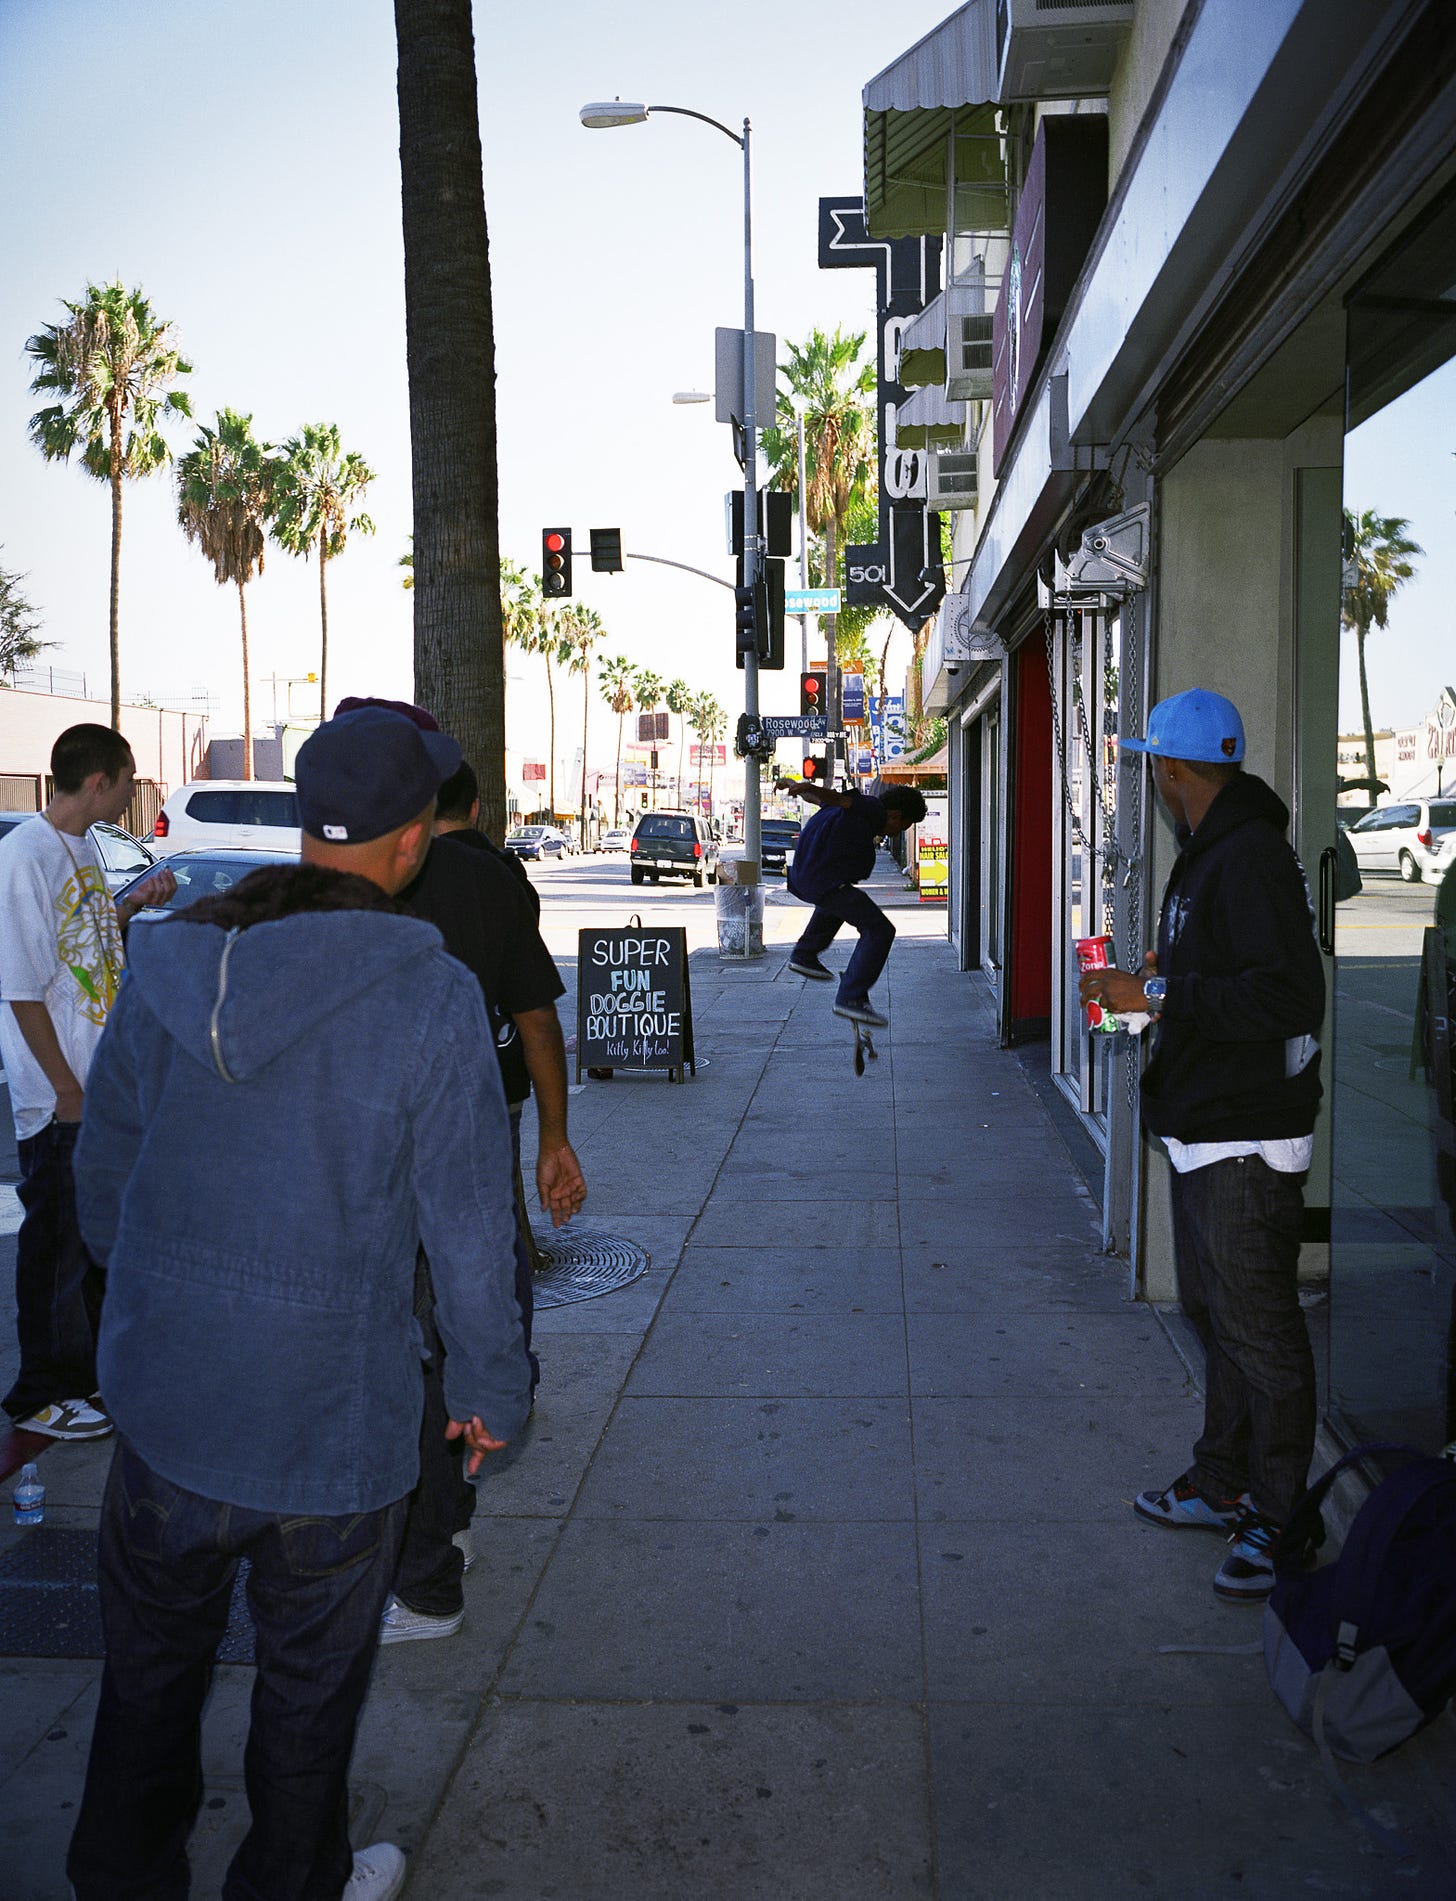 Young men and boys on Fairfax Avenue, Los Angeles